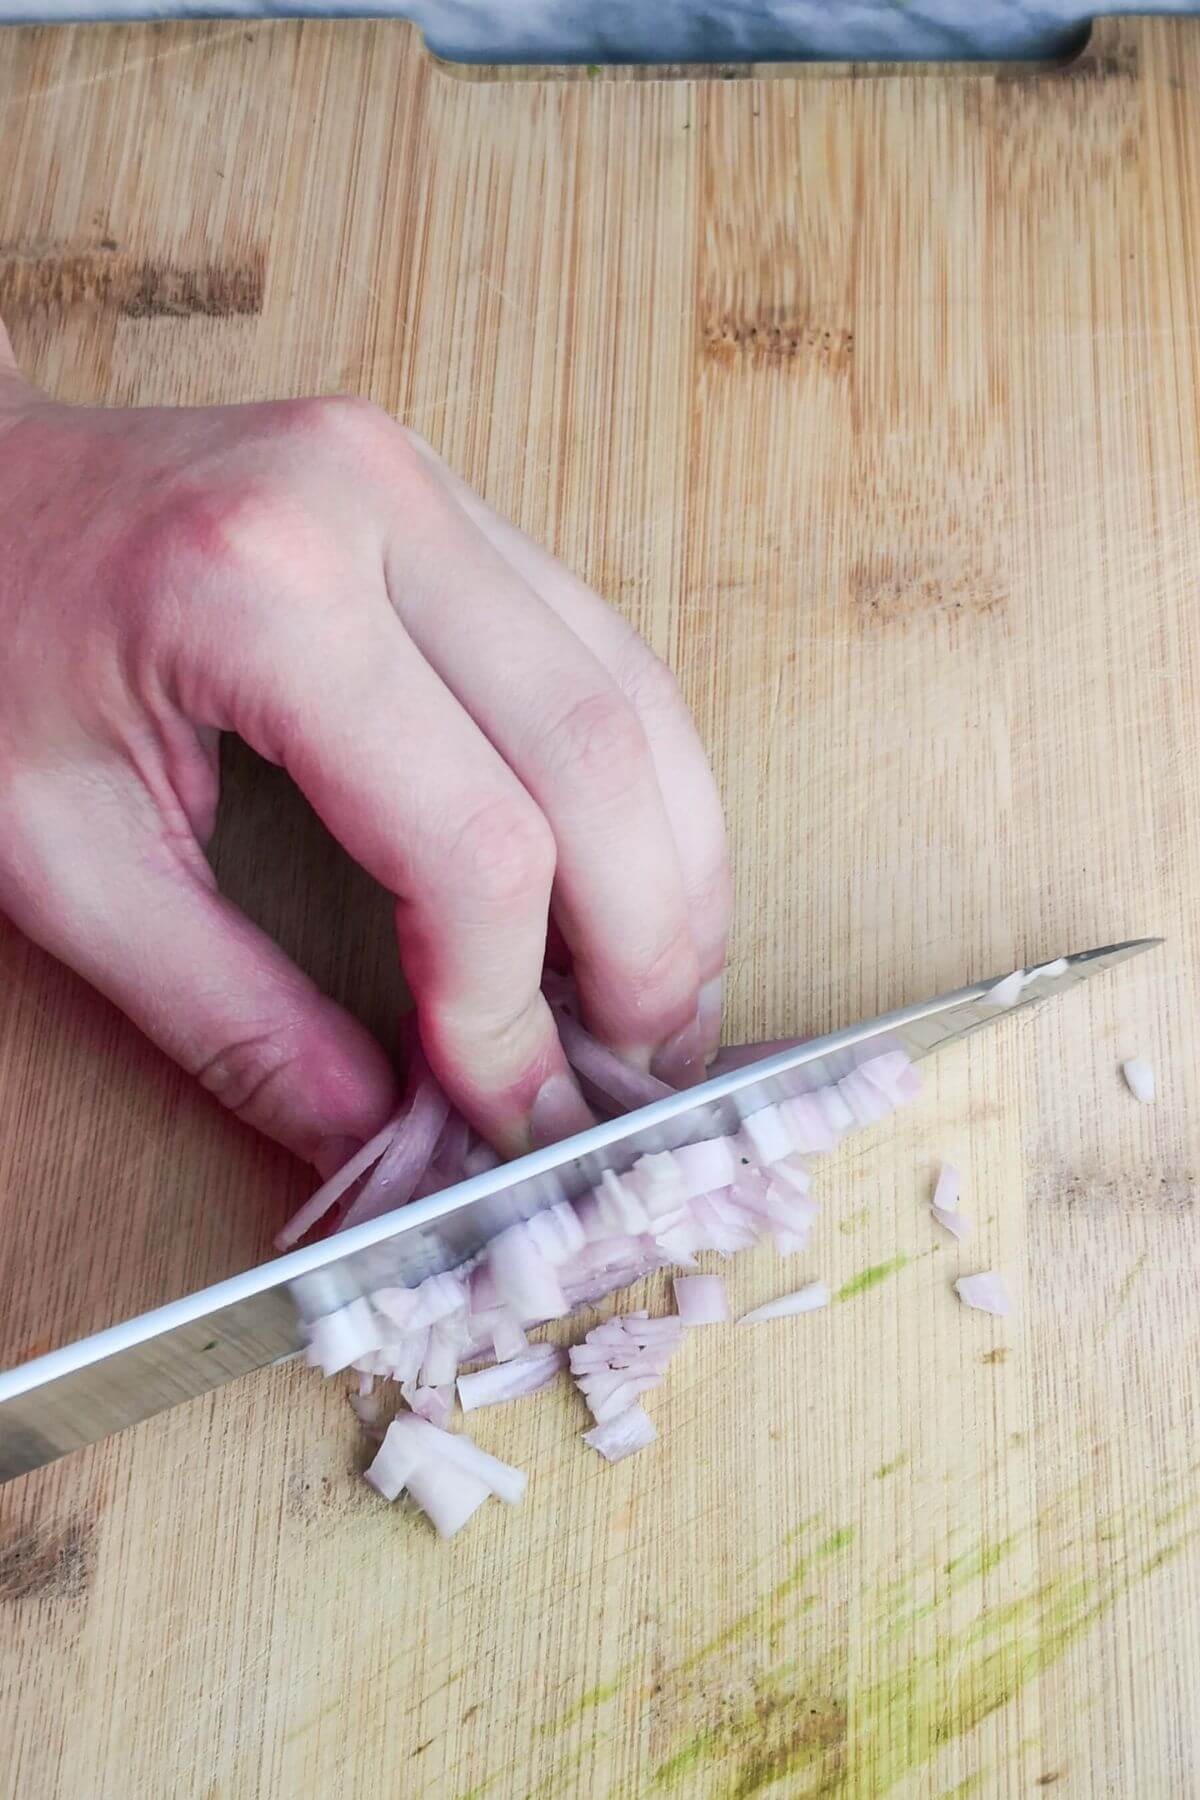 Finely dicing a shallot on a wooden board.